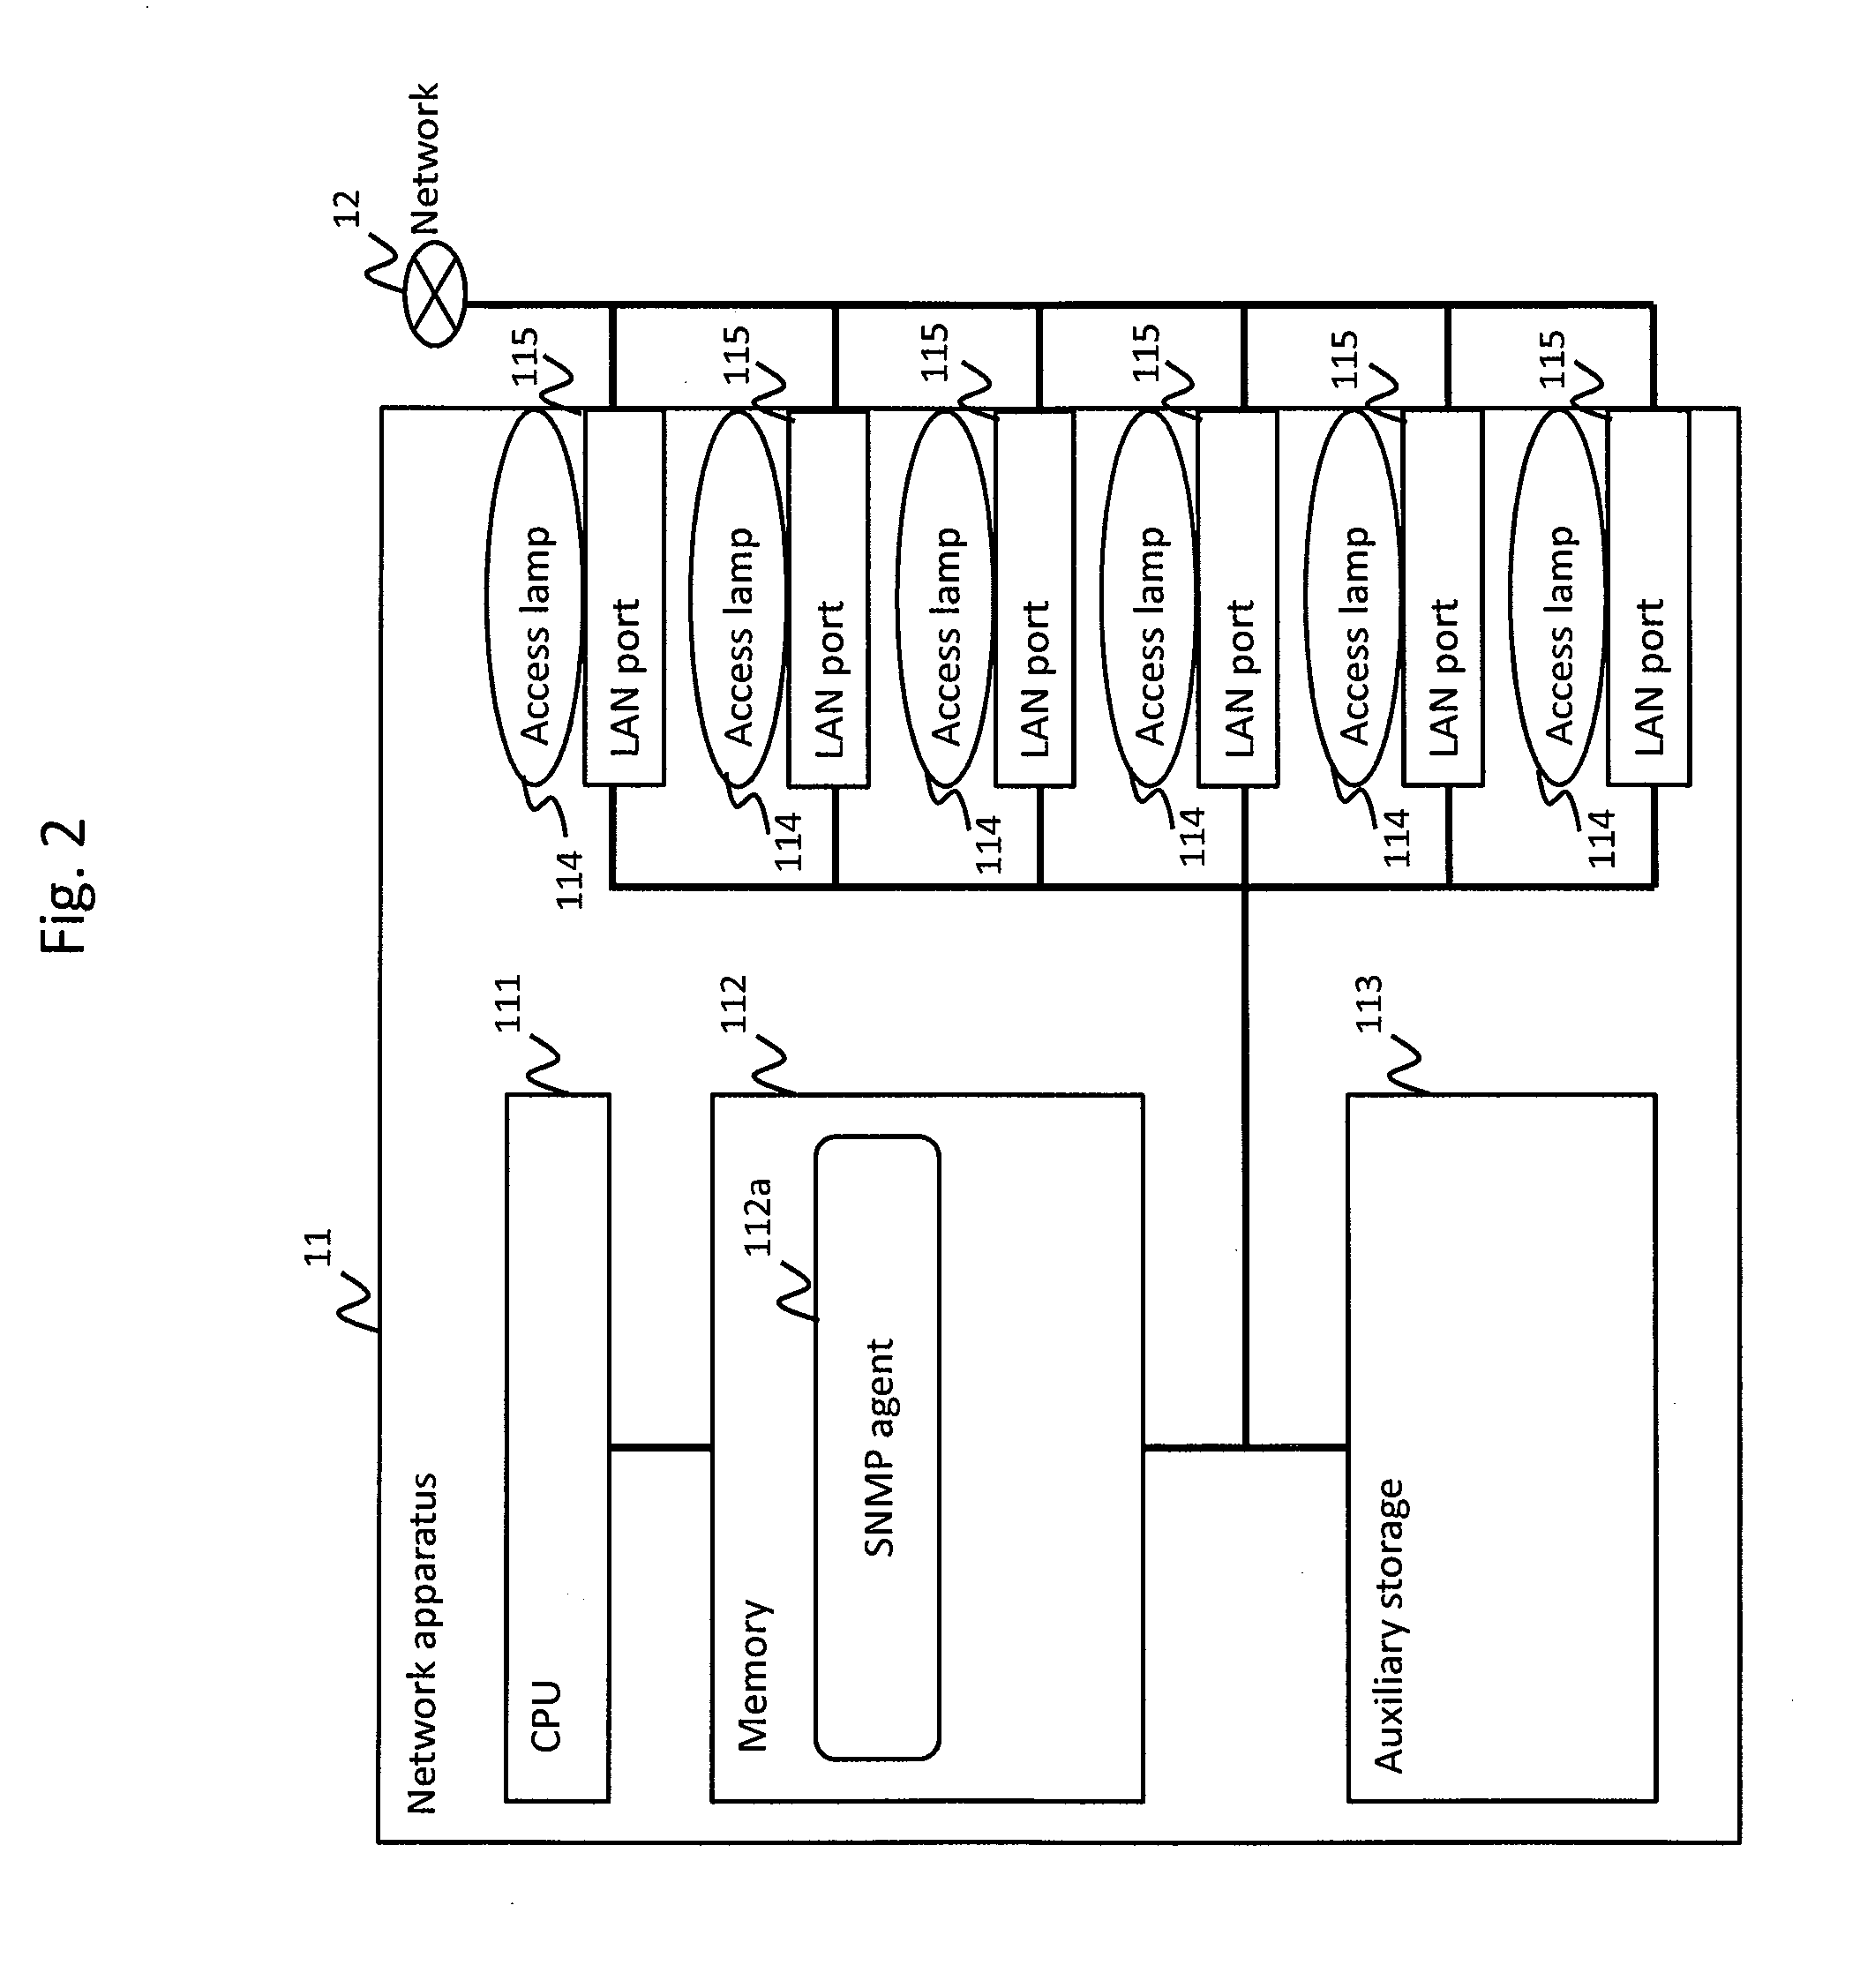 Network construction support system and method